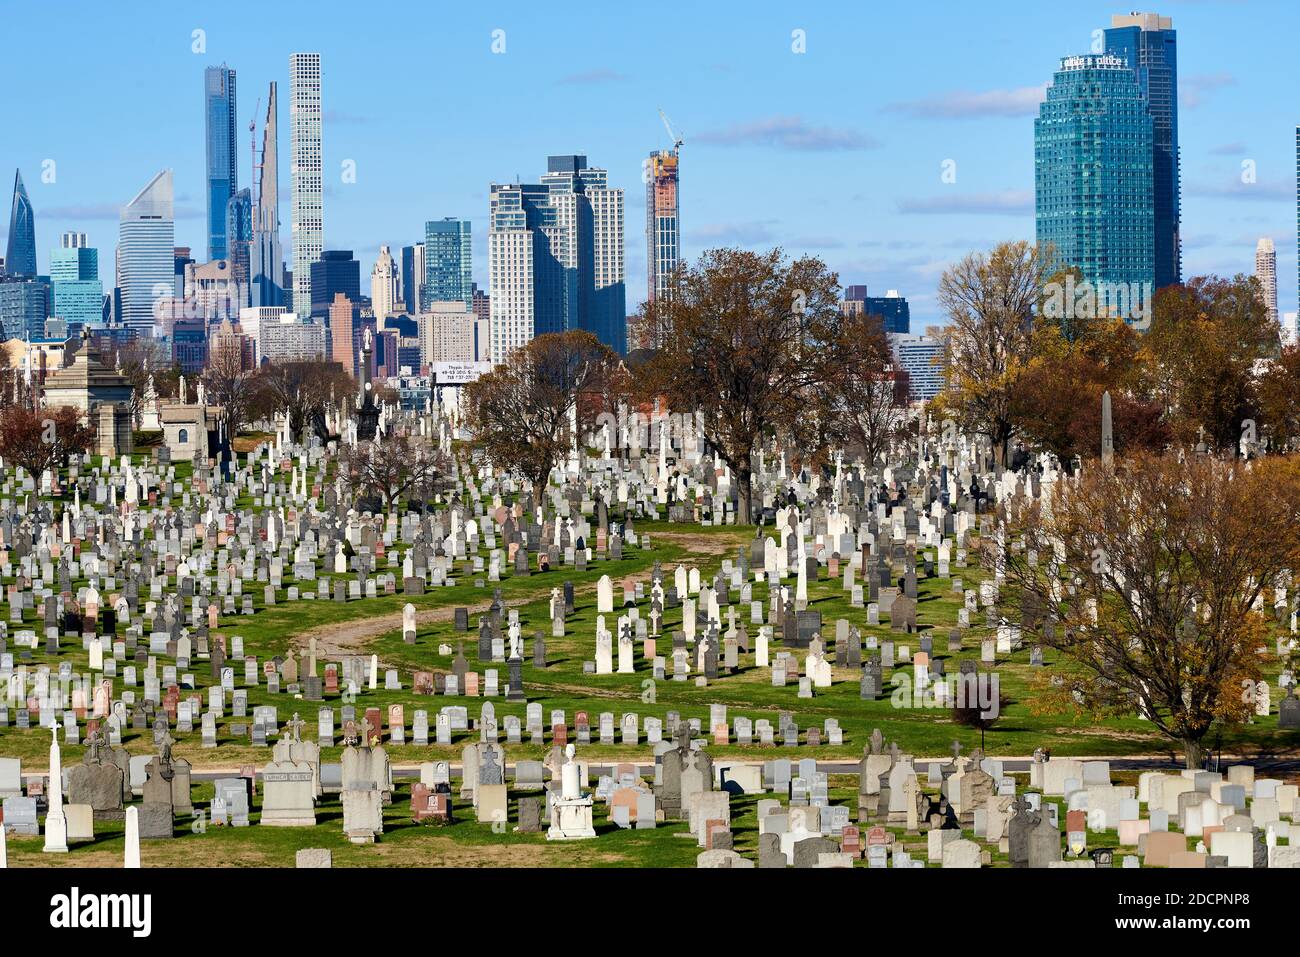 Queens, NY - November 16 2020: Cavalry Cemetery in Queens, NYC in front of the skyline of Midtown Manhattan. Calvary Cemetery has the largest number o Stock Photo